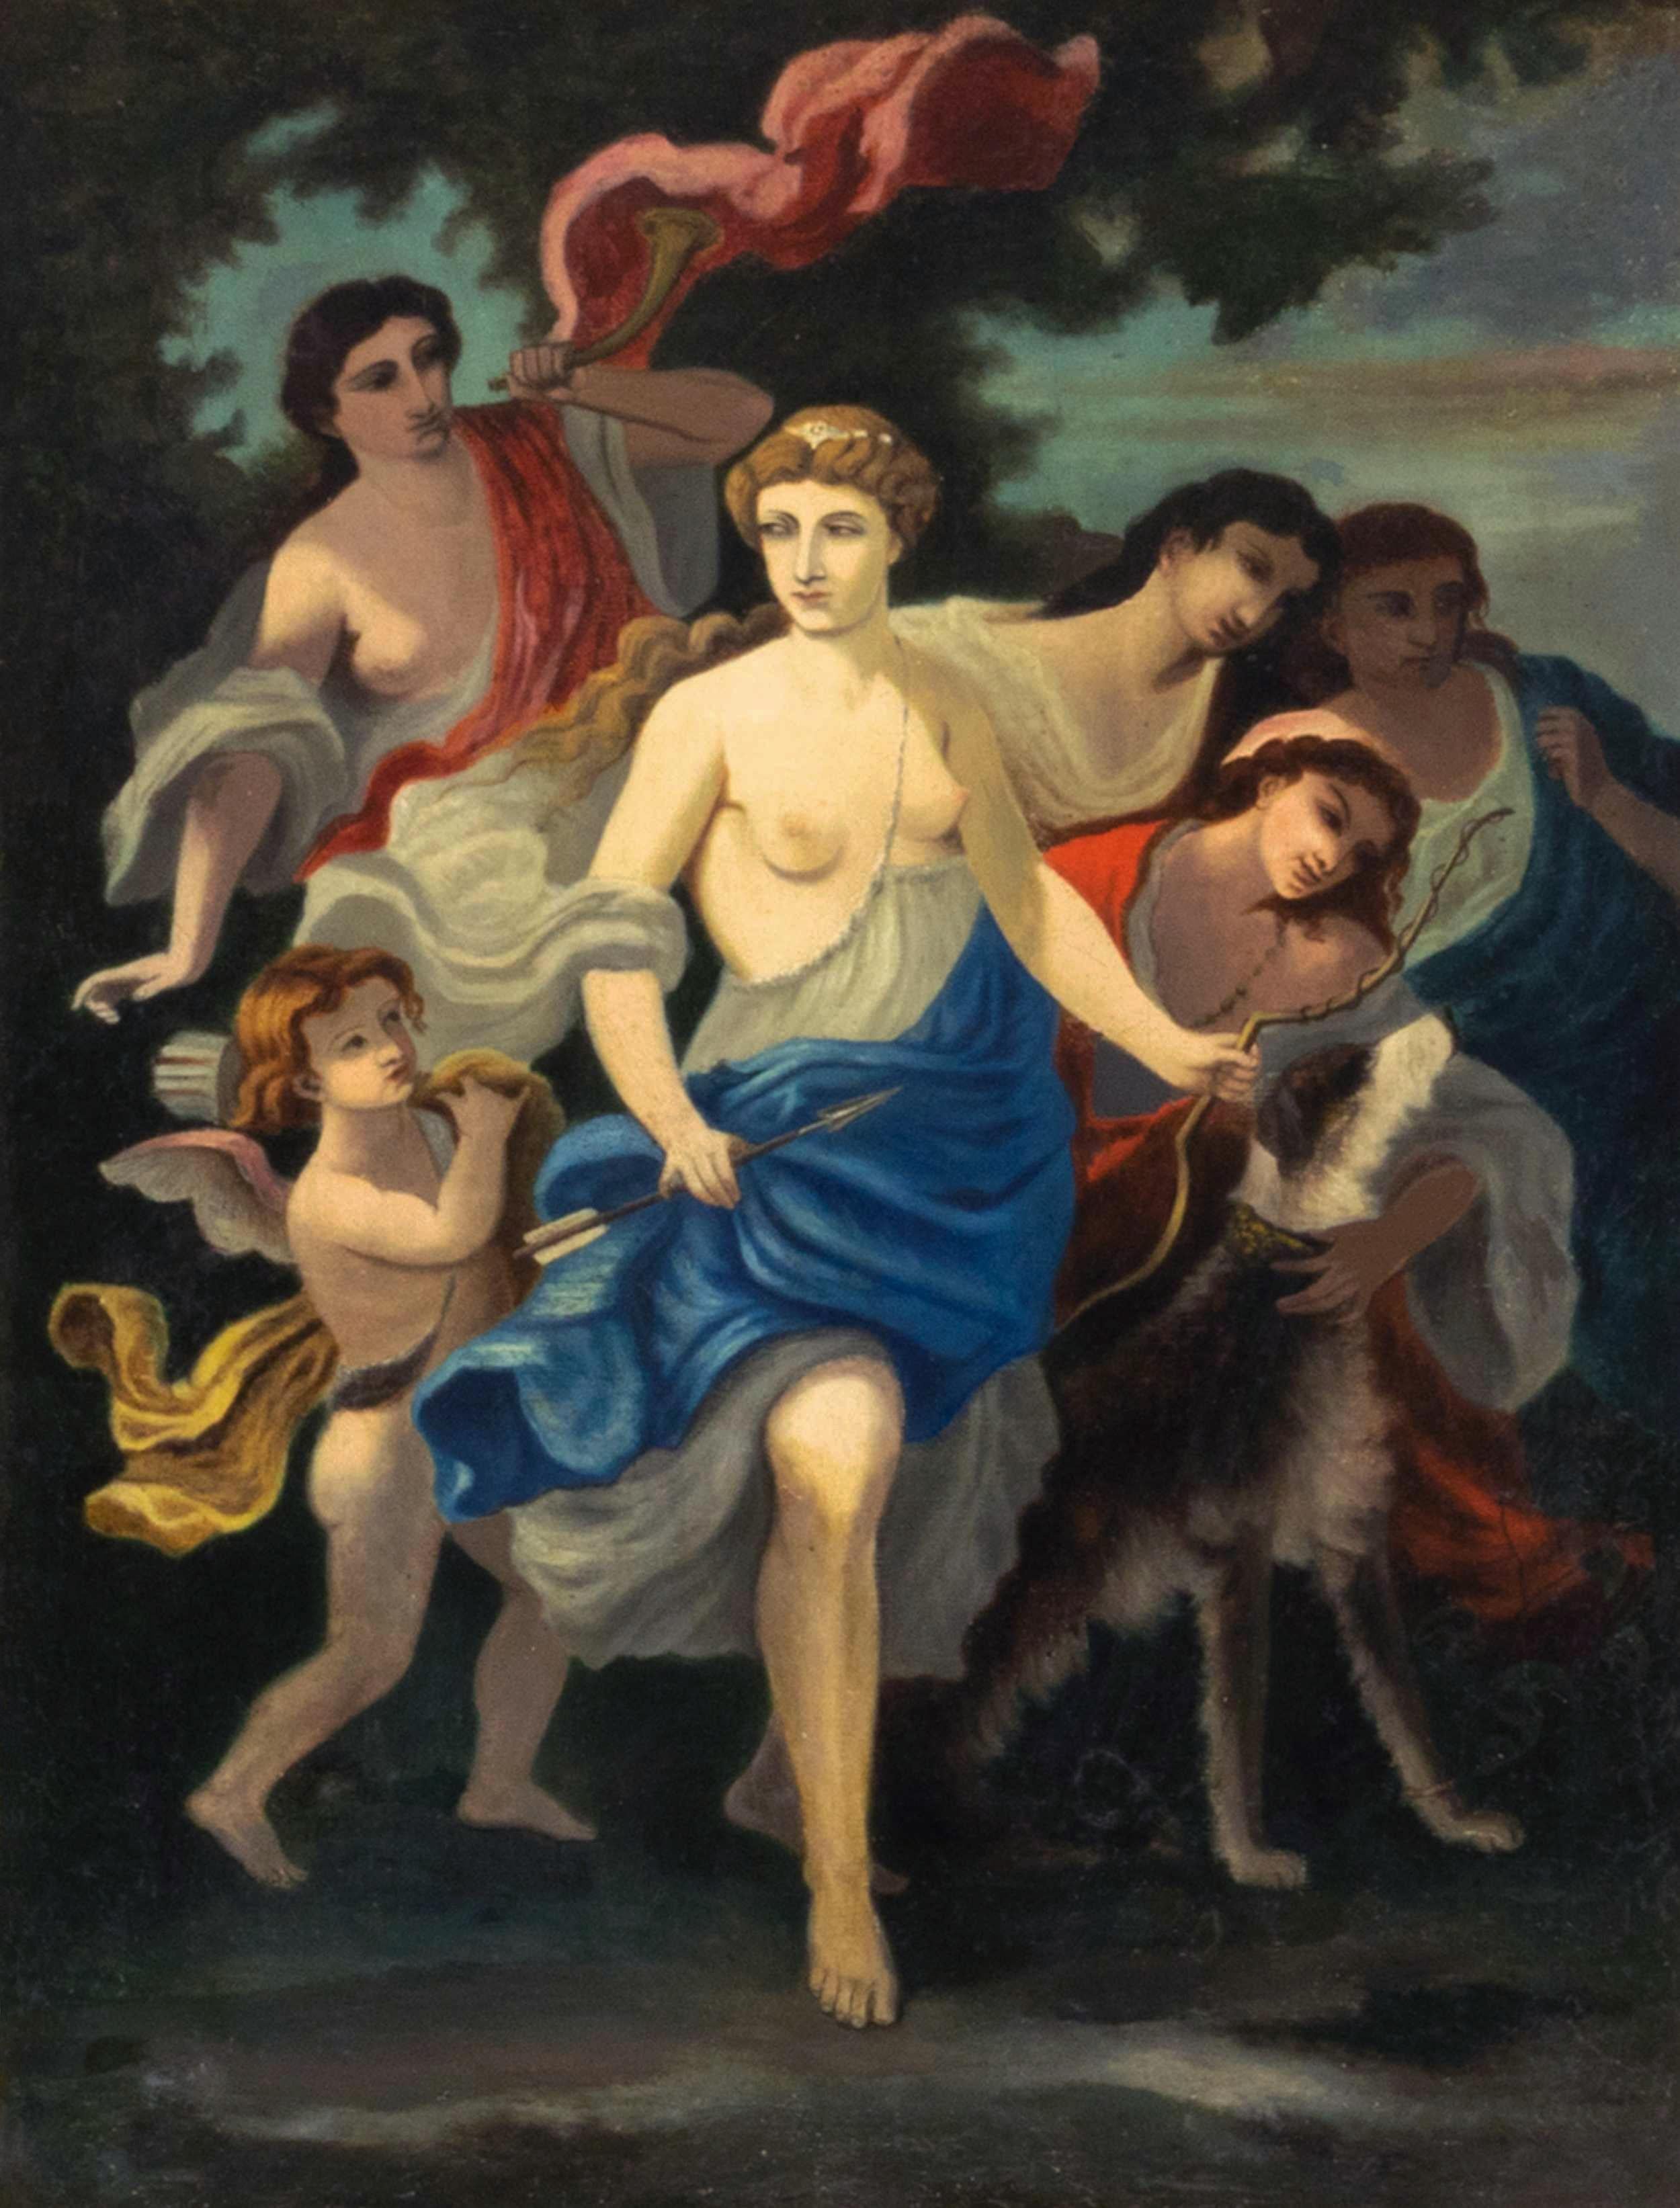 A great painting of a classic mythology scene. 
Diana the goddess and the nymphs Uraniaand Calliope with a hunting
dog. Very exactly drawn figures in the foreground, soft brush strokes so the surface of the painting appears polished, backgrounds